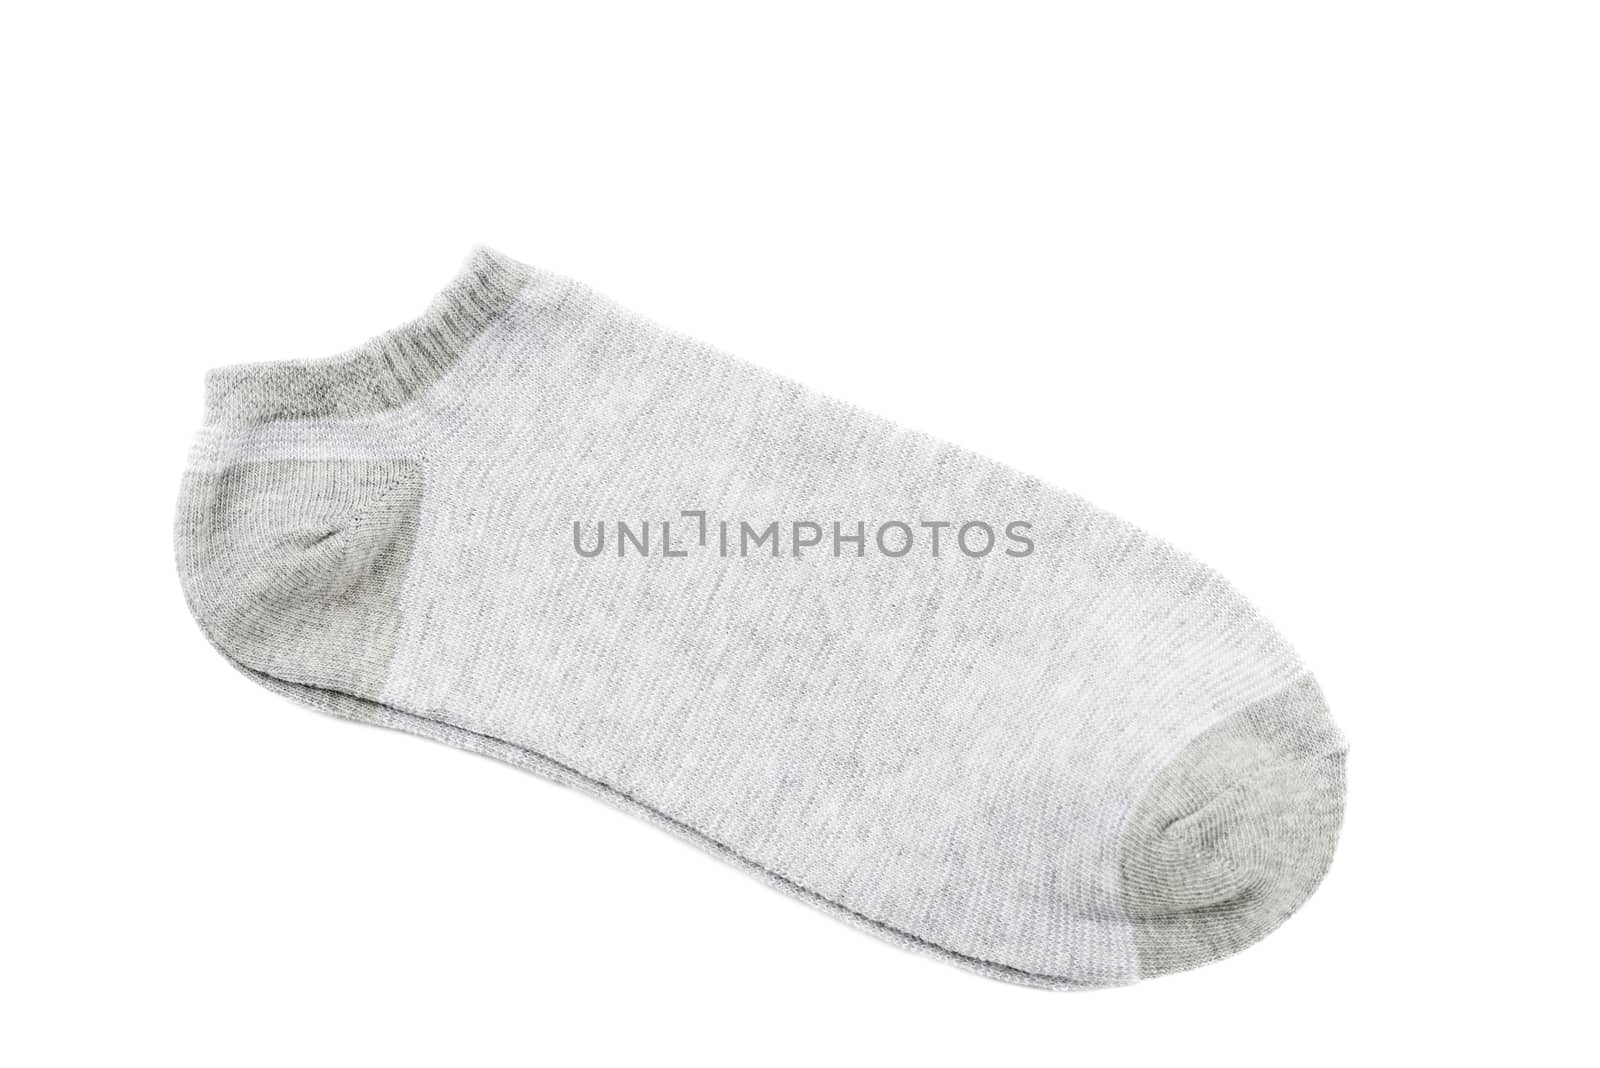 A pair of fashionable striped short socks isolated on white background